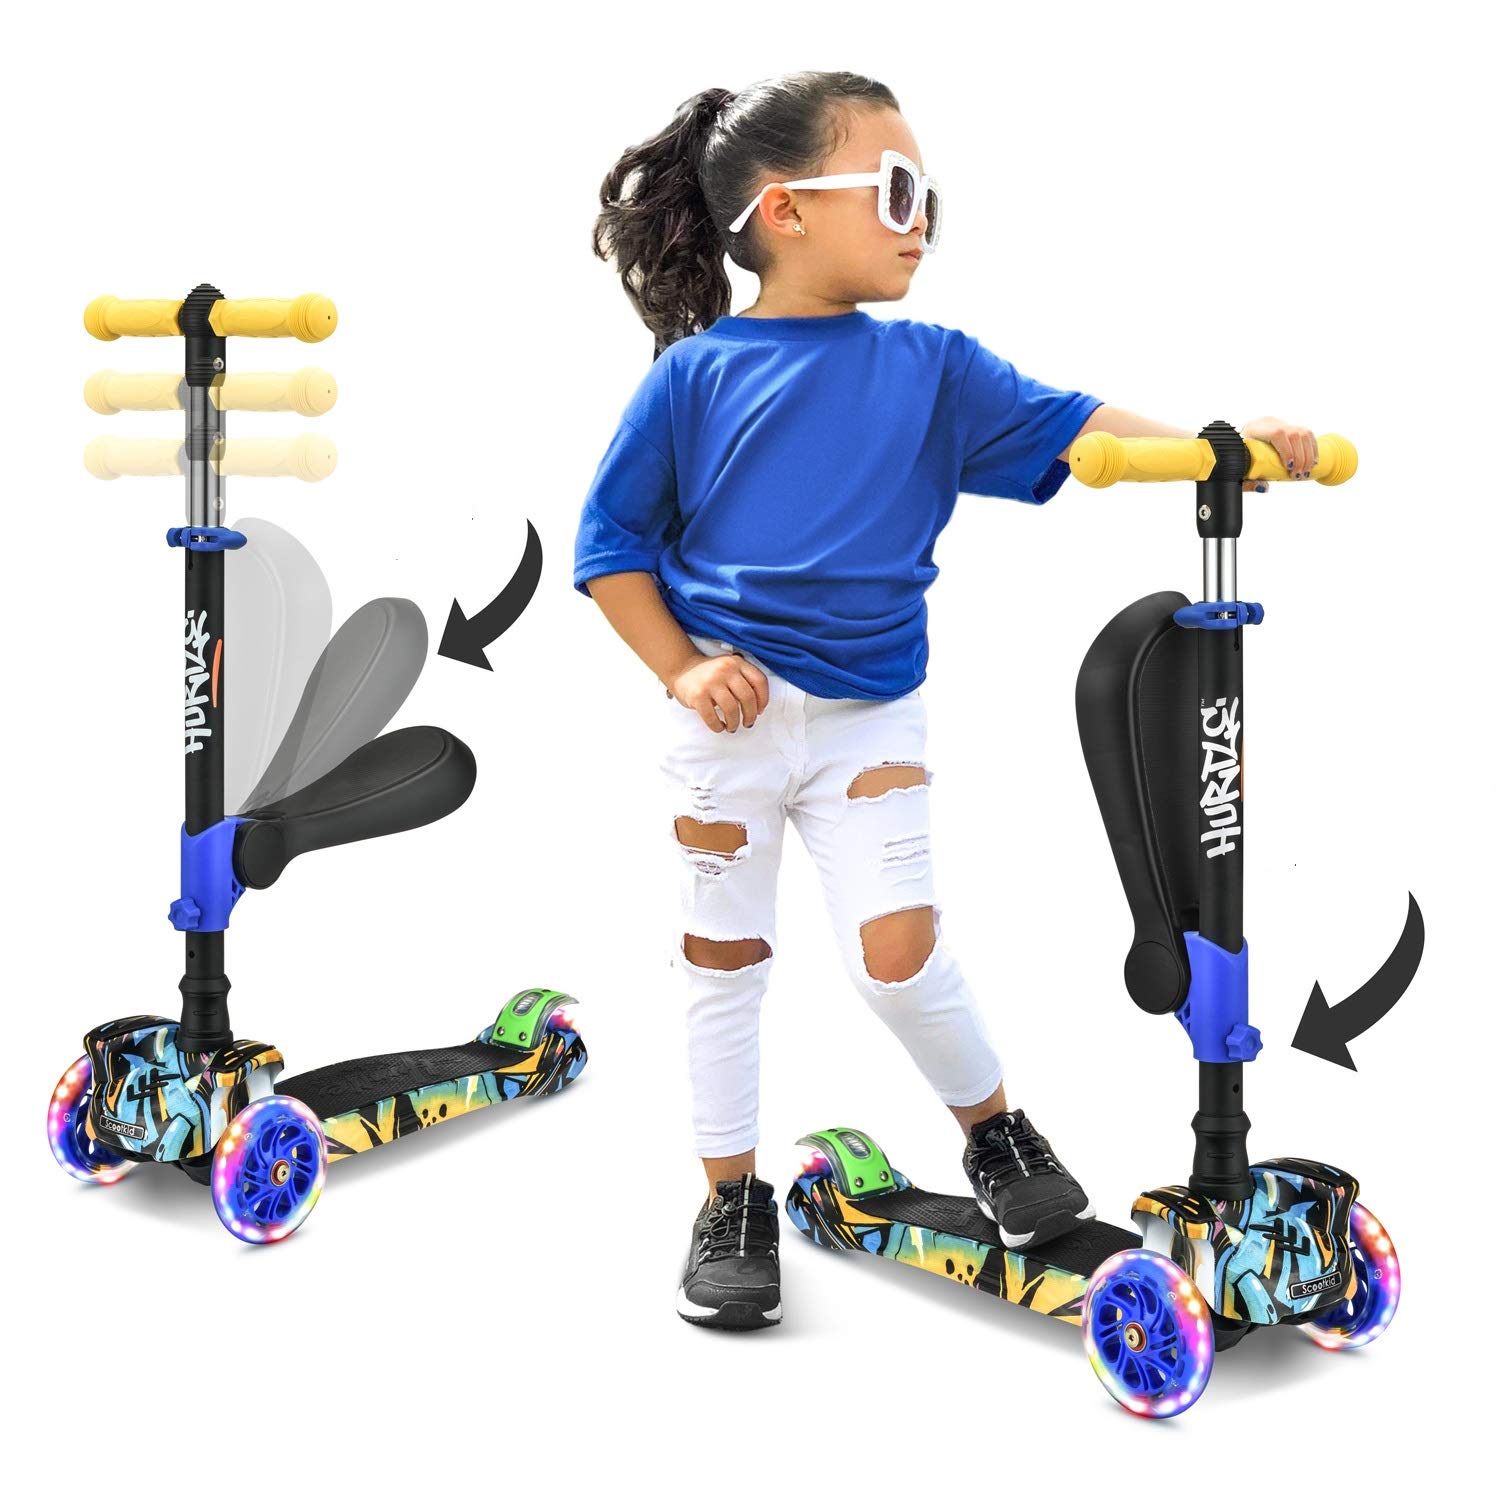 Hurtle 10 Wheeled Scooter for Kids - Stand & Cruise Child/Toddlers Toy Folding Kick Scooters w/Adjustable Height, Anti-Slip Deck, Flashing Wheel Lights $39.56